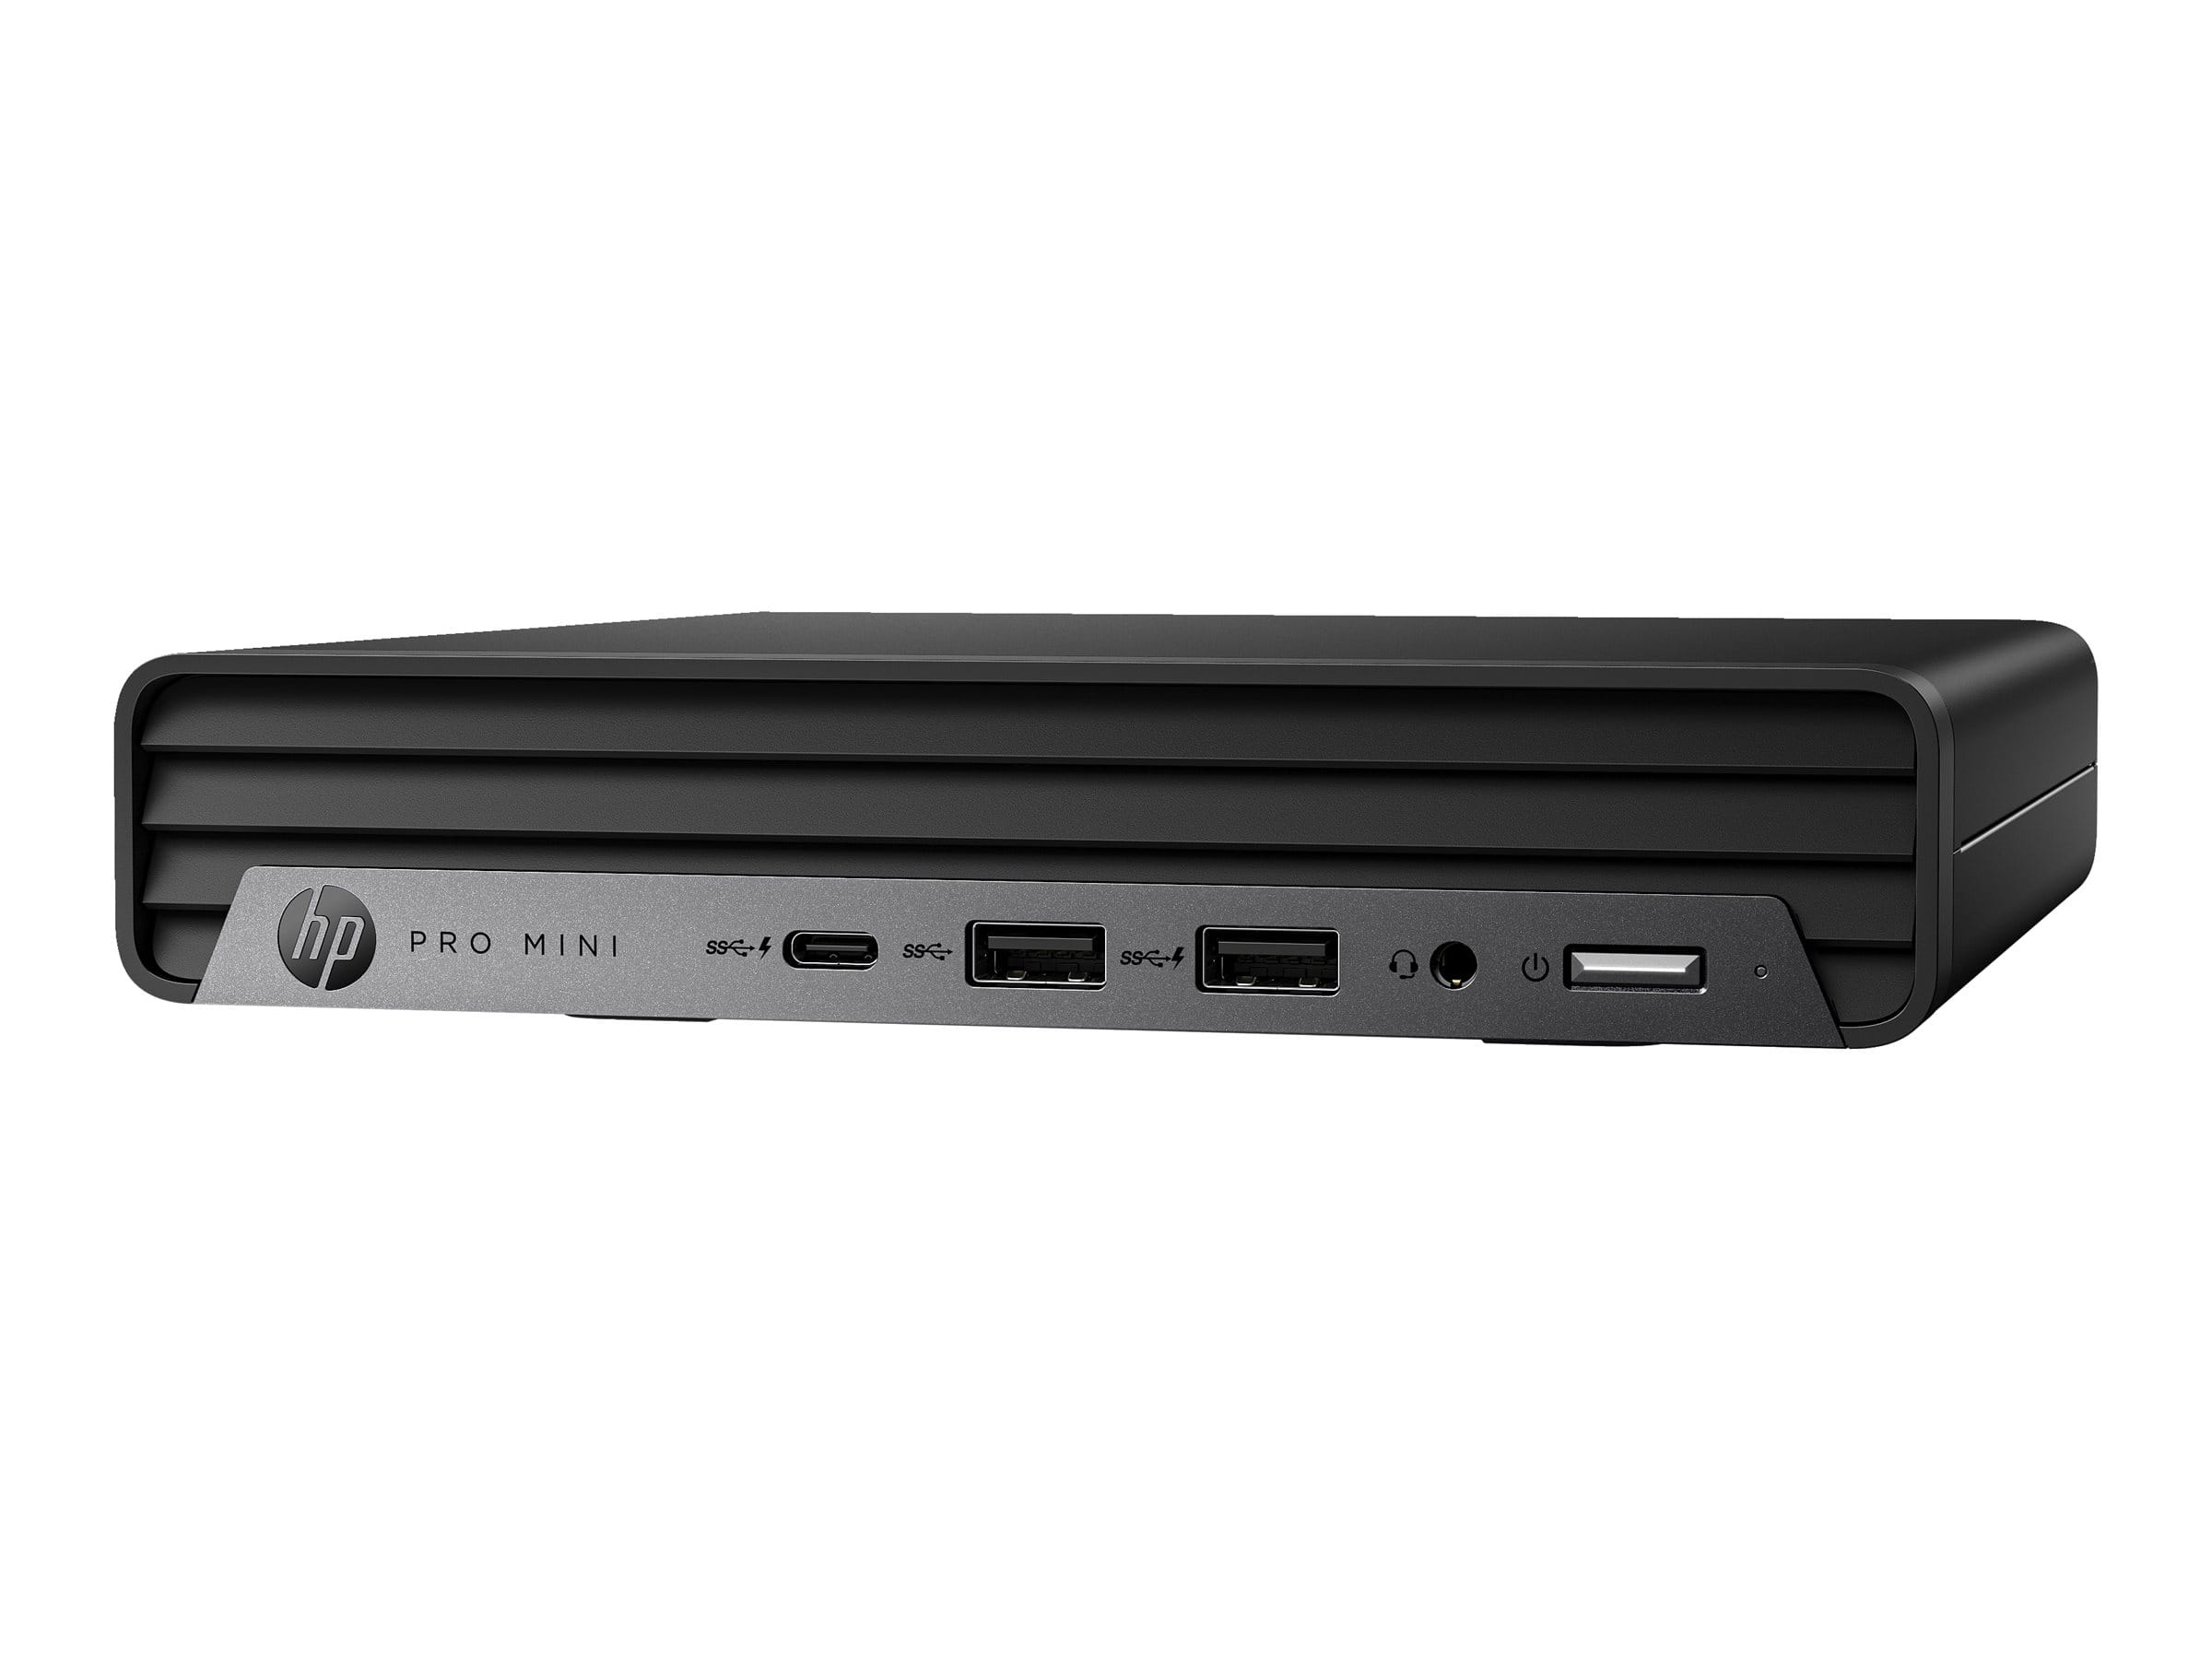 HP Pro 400 G9 - Wolf Pro Security - Mini - Core i5 12500T / 2 GHz - RAM 8 GB - SSD 256 GB - NVMe, HP Value - UHD Graphics 770 - 1GbE, Bluetooth 5.2, Wi-Fi 6E - WLAN: Bluetooth 5.2, 802.11a/b/g/n/ac/ax (Wi-Fi 6E)